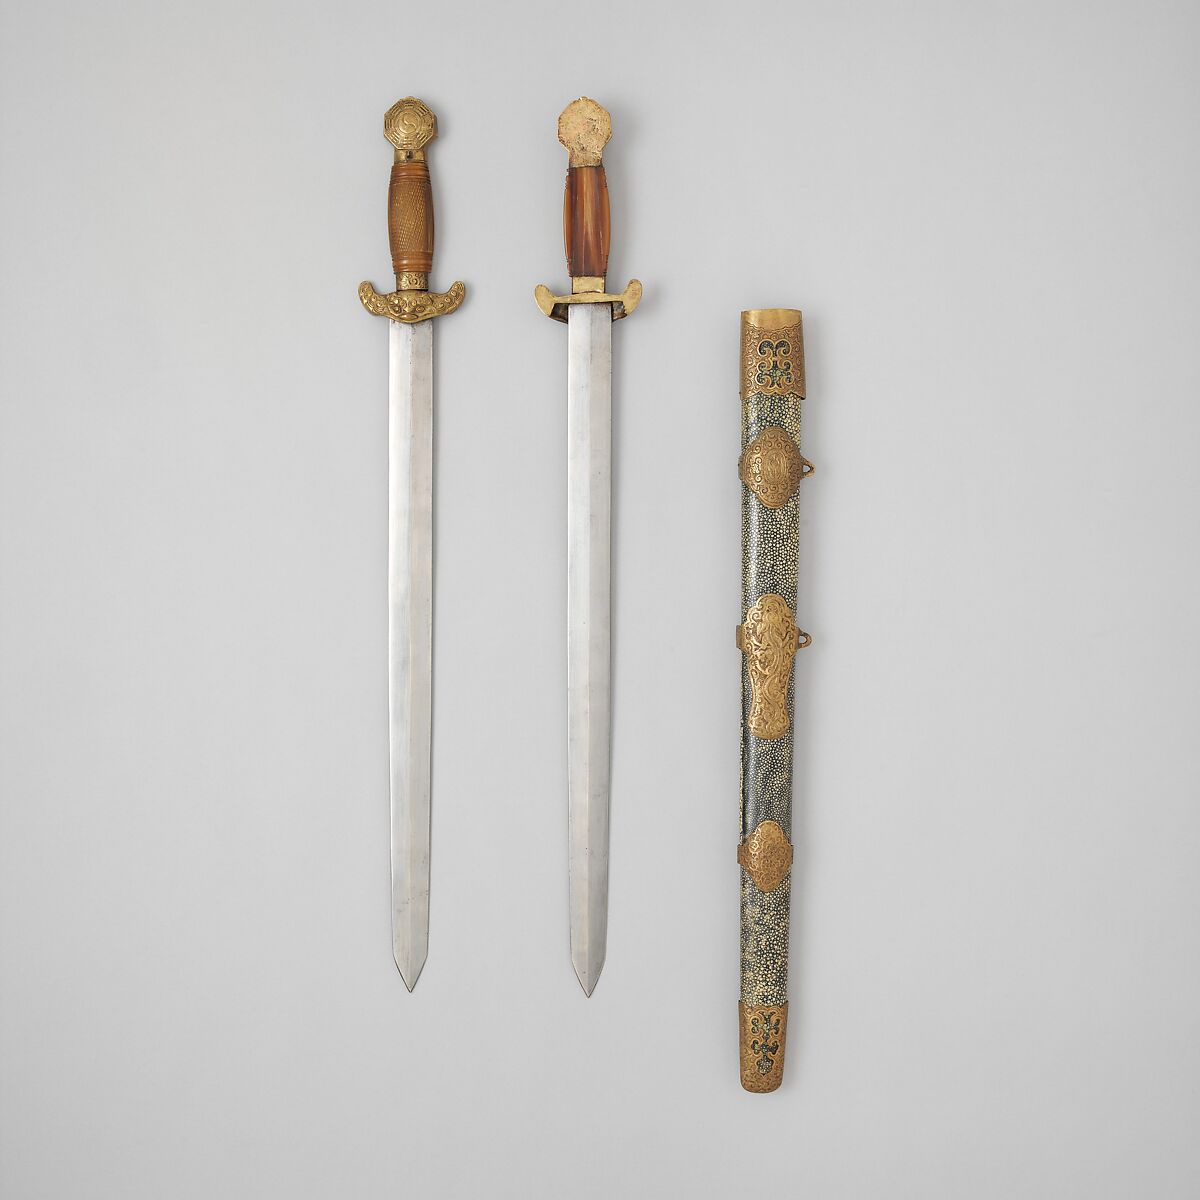 Double Sword with Scabbard, Steel, bronze, sharkskin, horn, wood, Chinese 